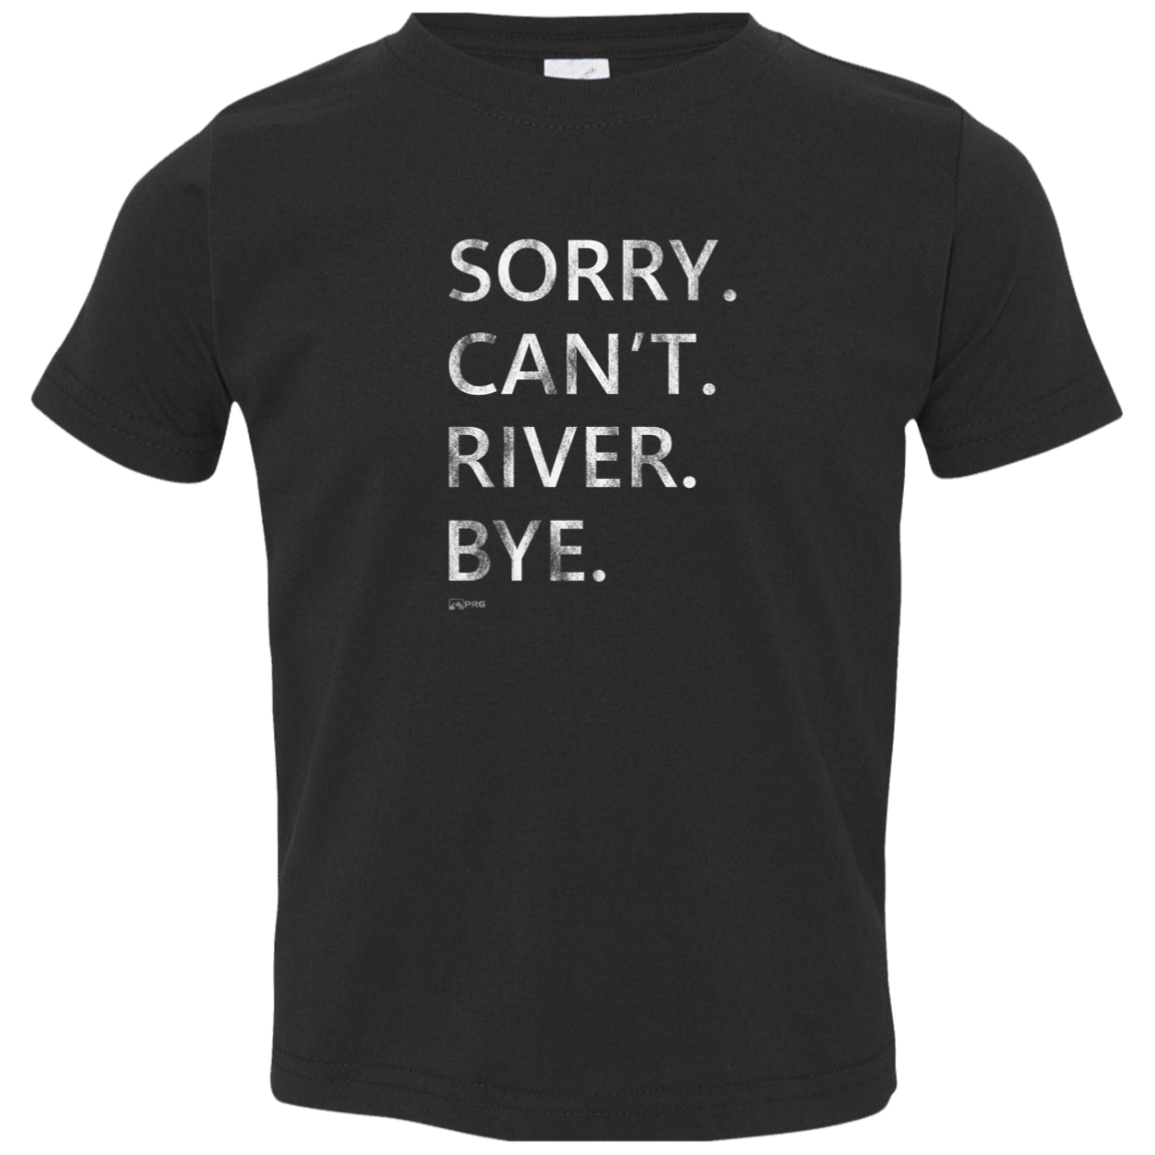 Sorry. Can't. River. Bye. - Toddler Shirt